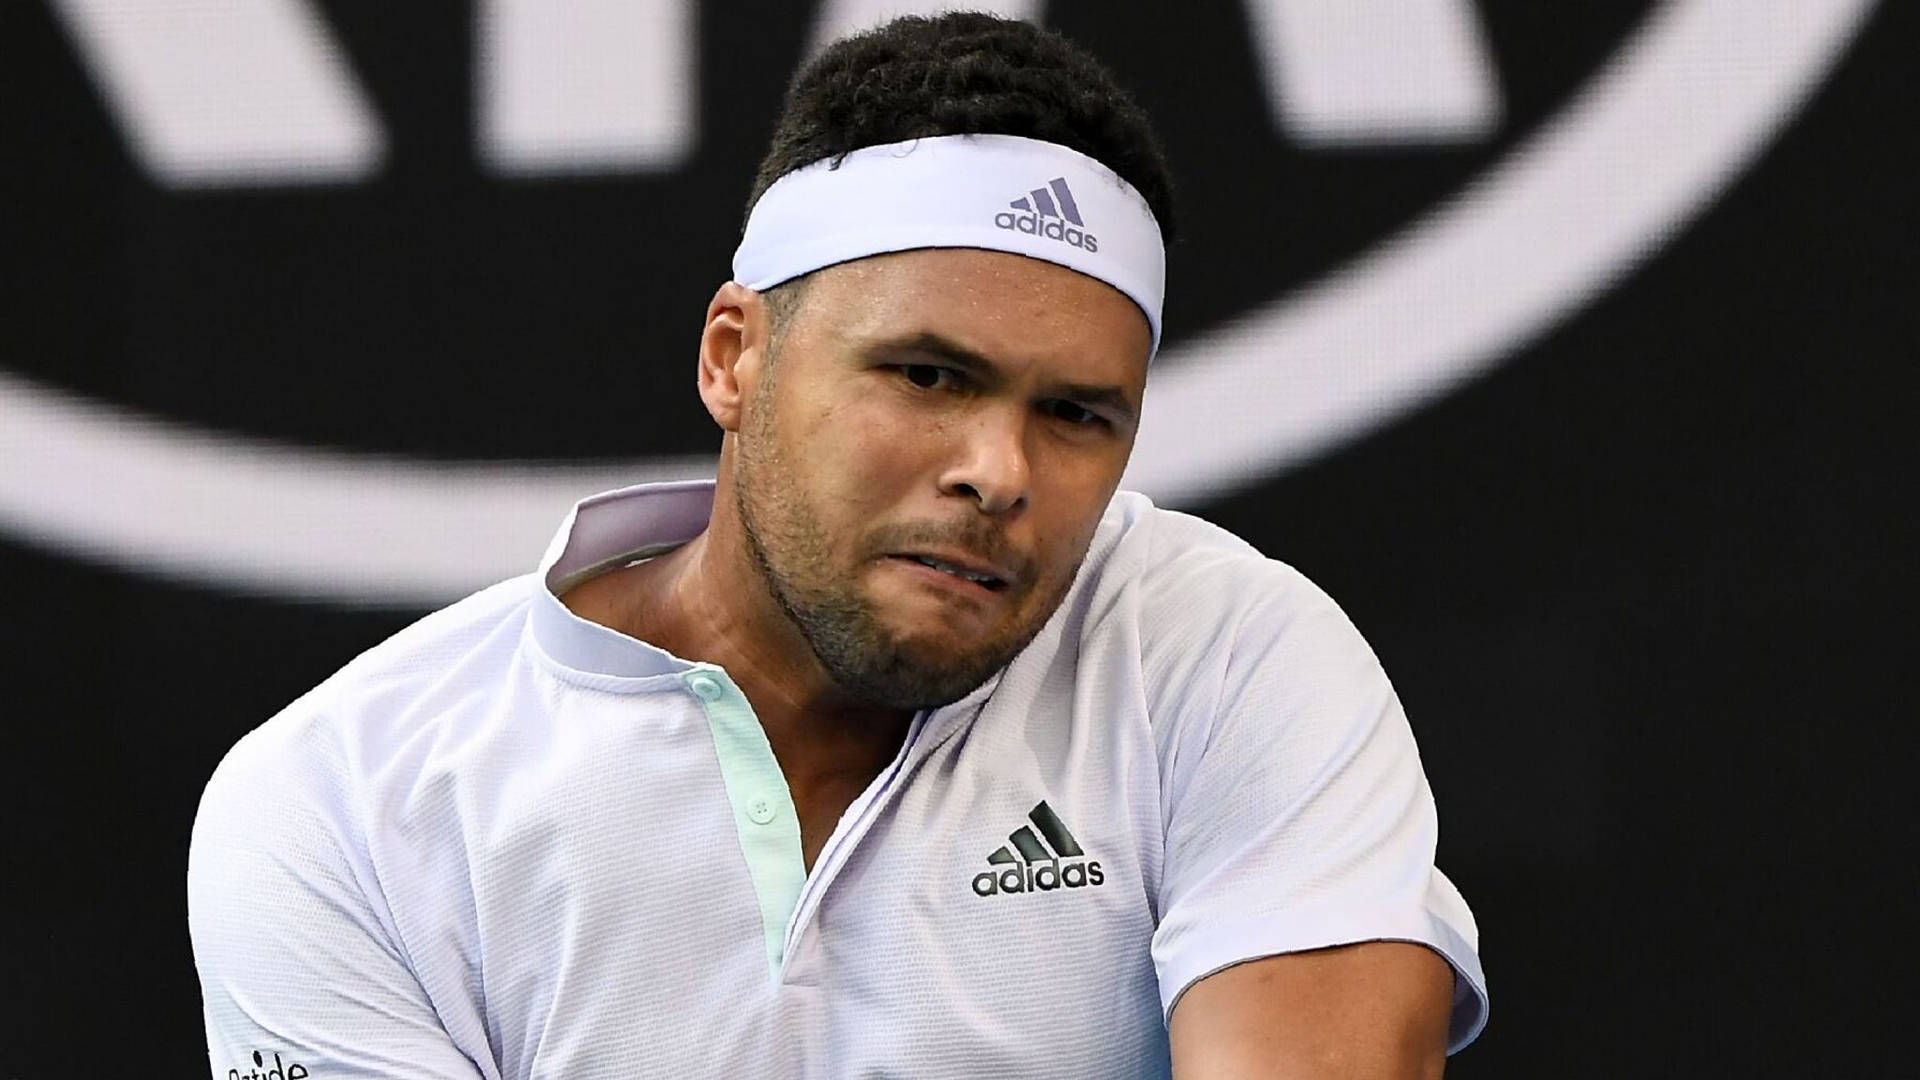 Jowilfried Tsonga Grimace Close-up Would Be Translated To 